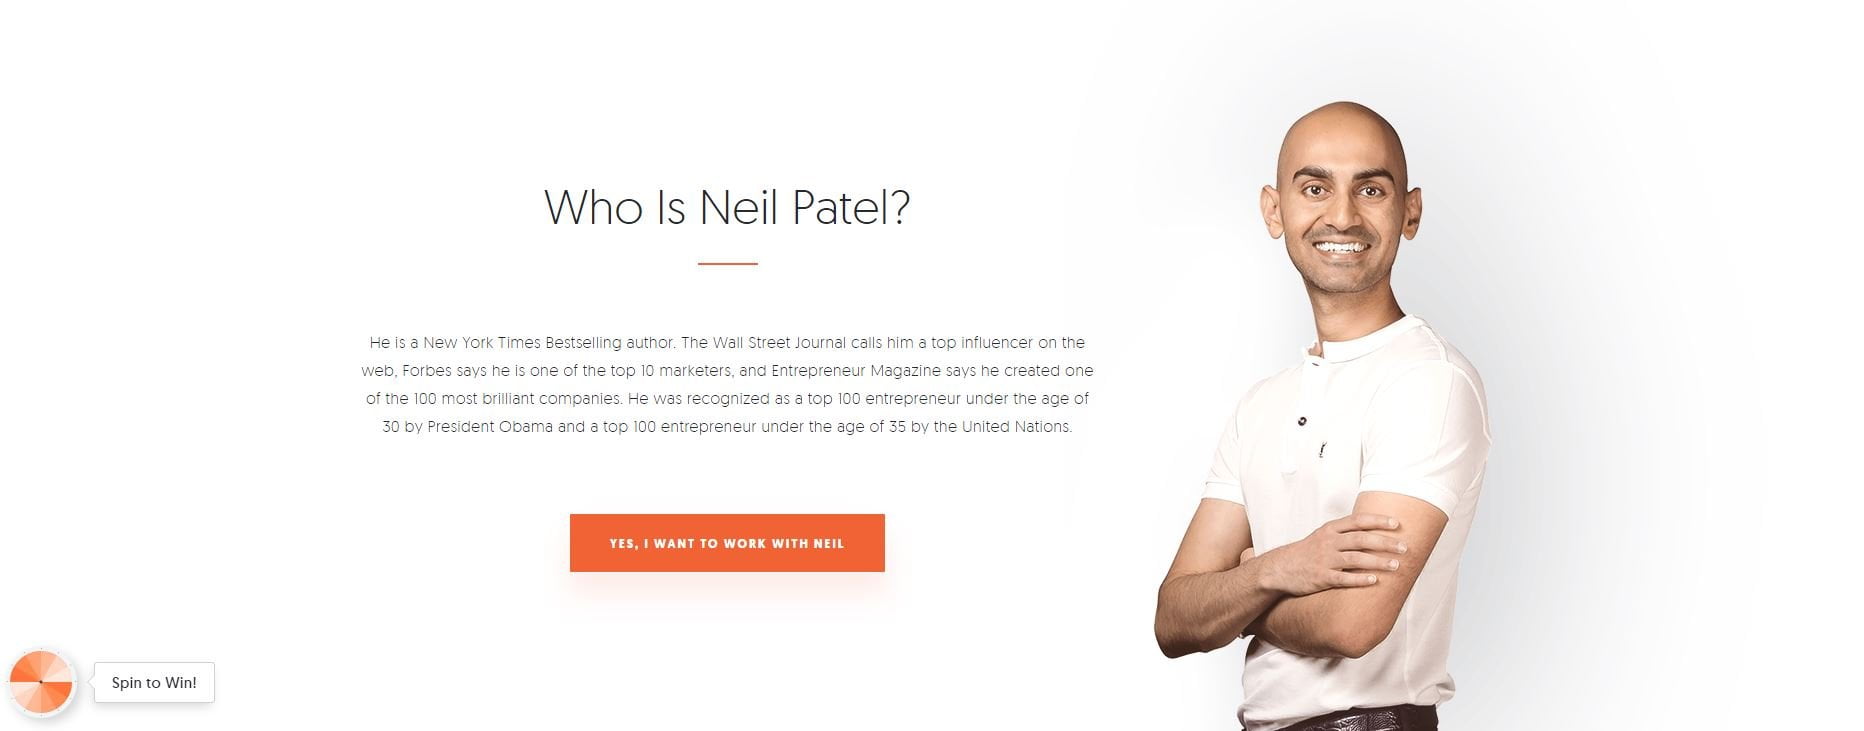 Second Neil Patel call to action